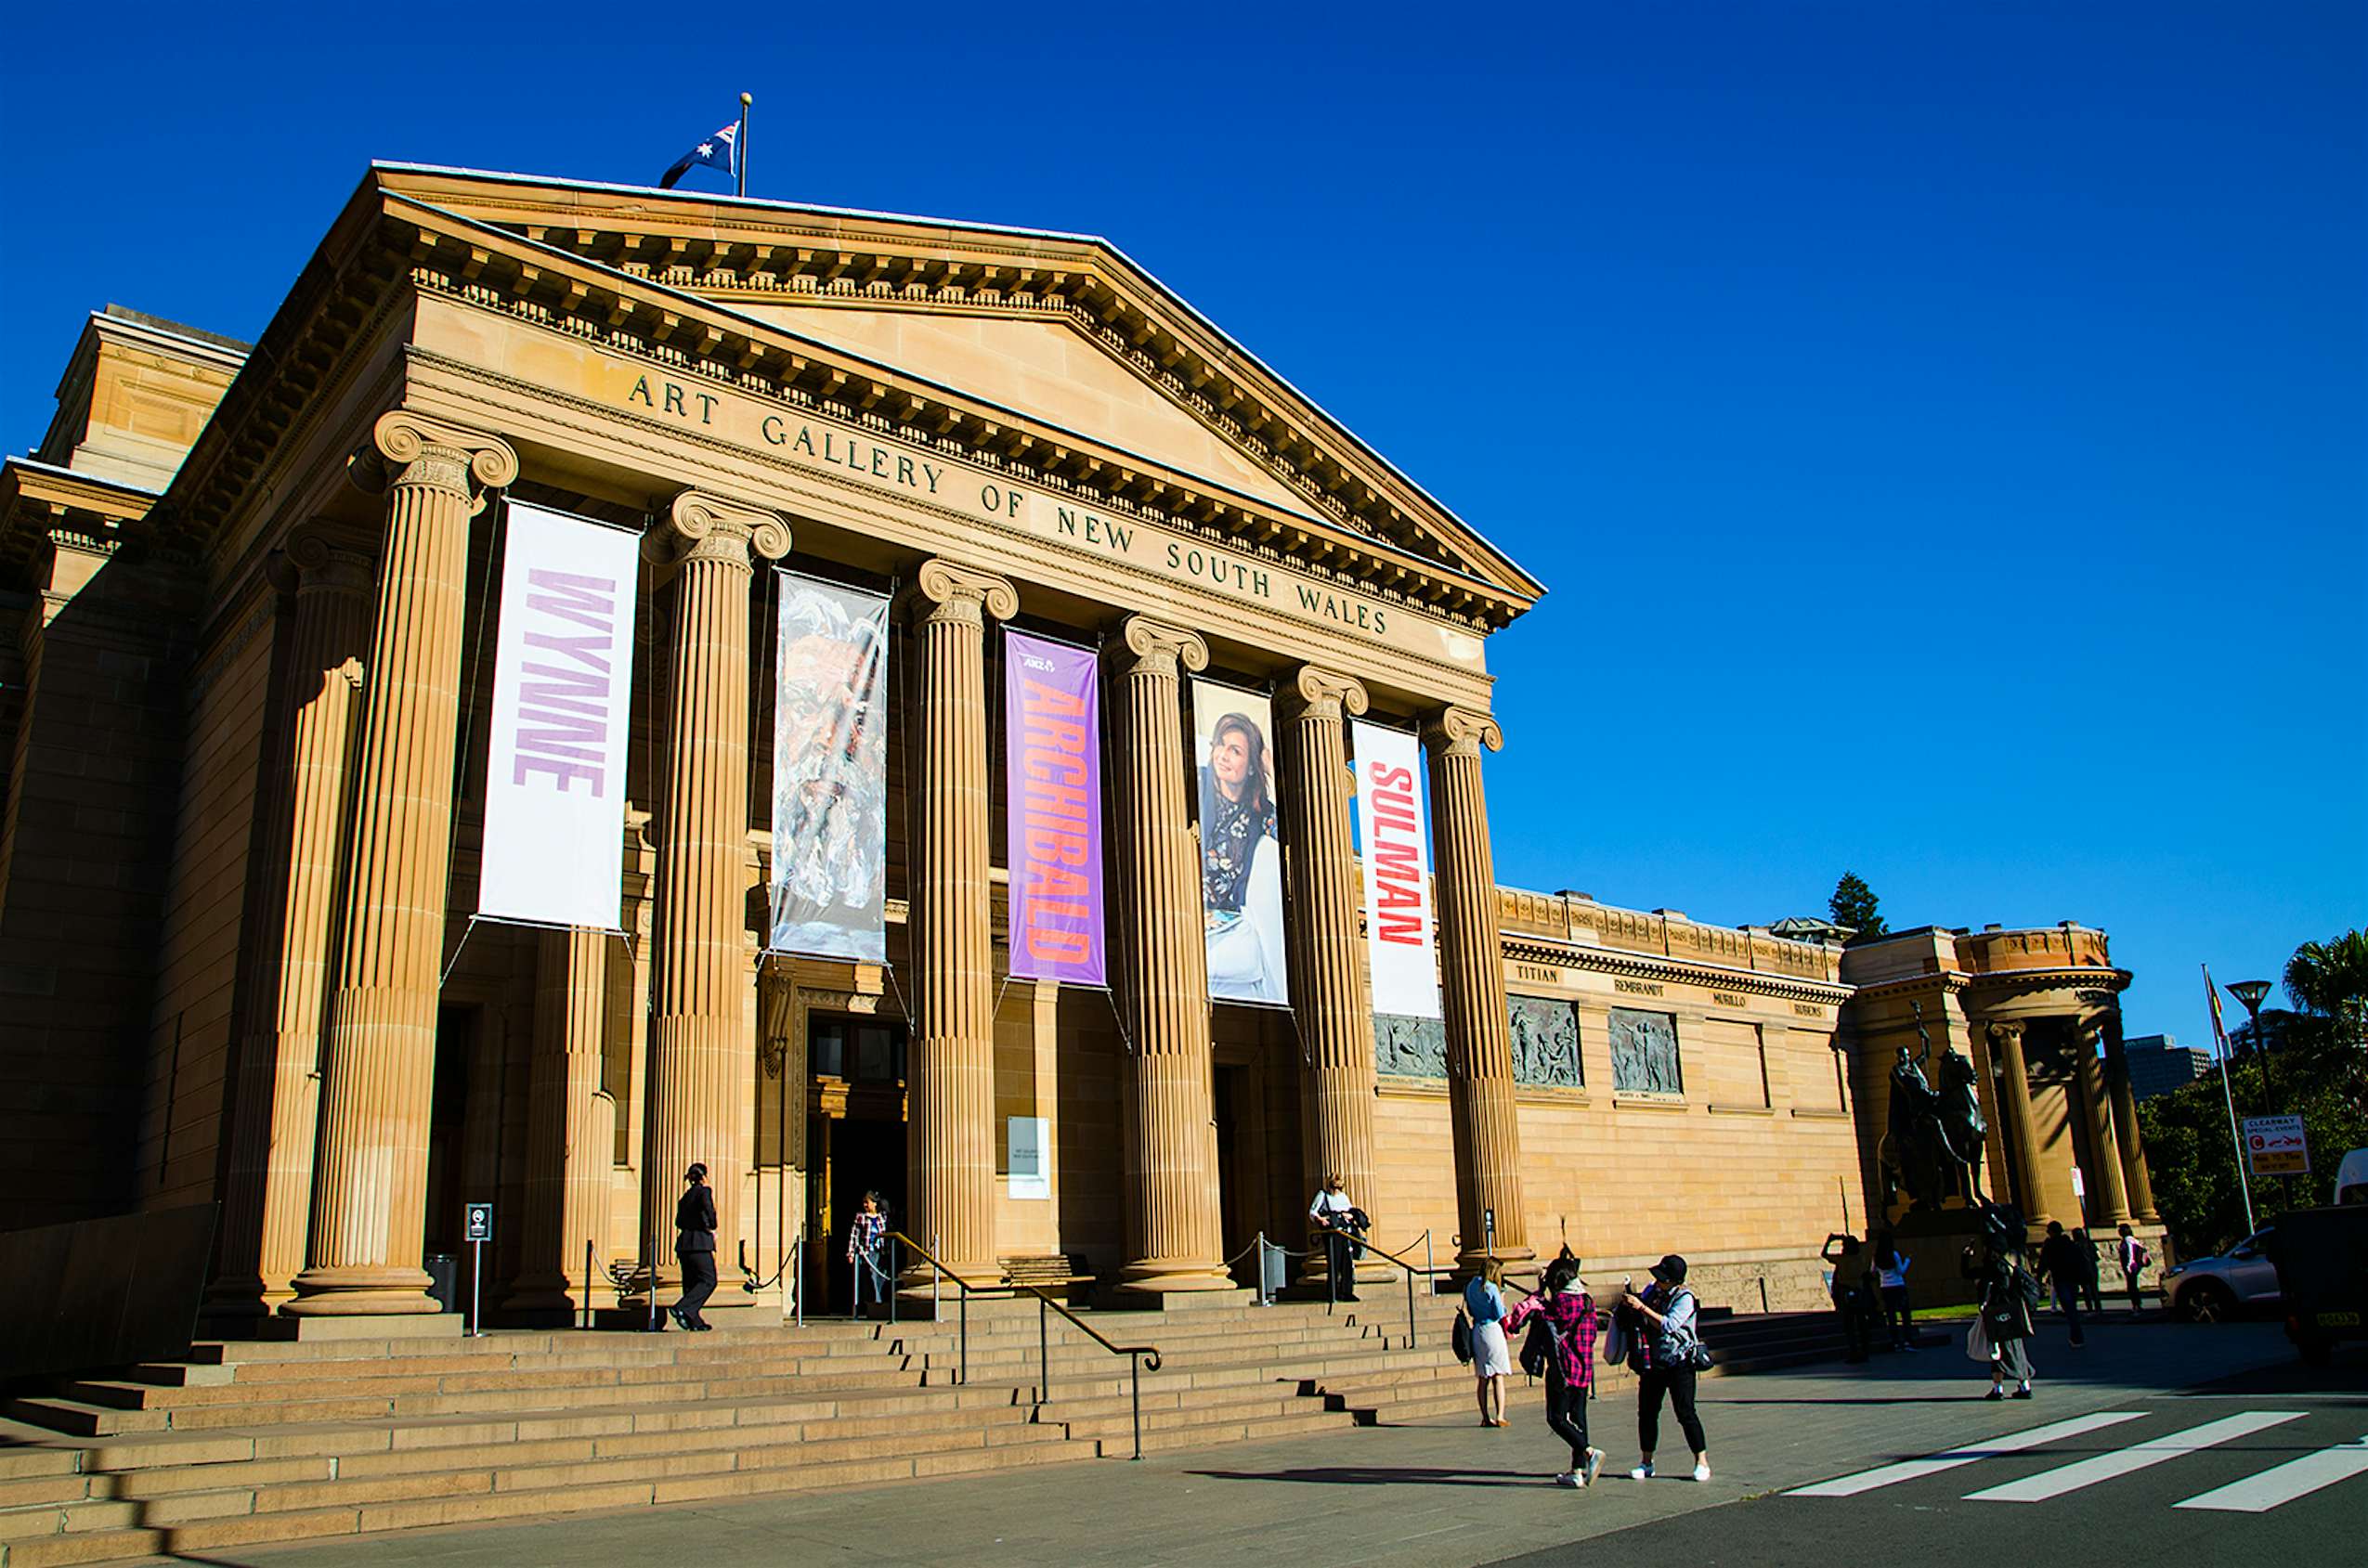 31 free things to do in Sydney - Lonely Planet